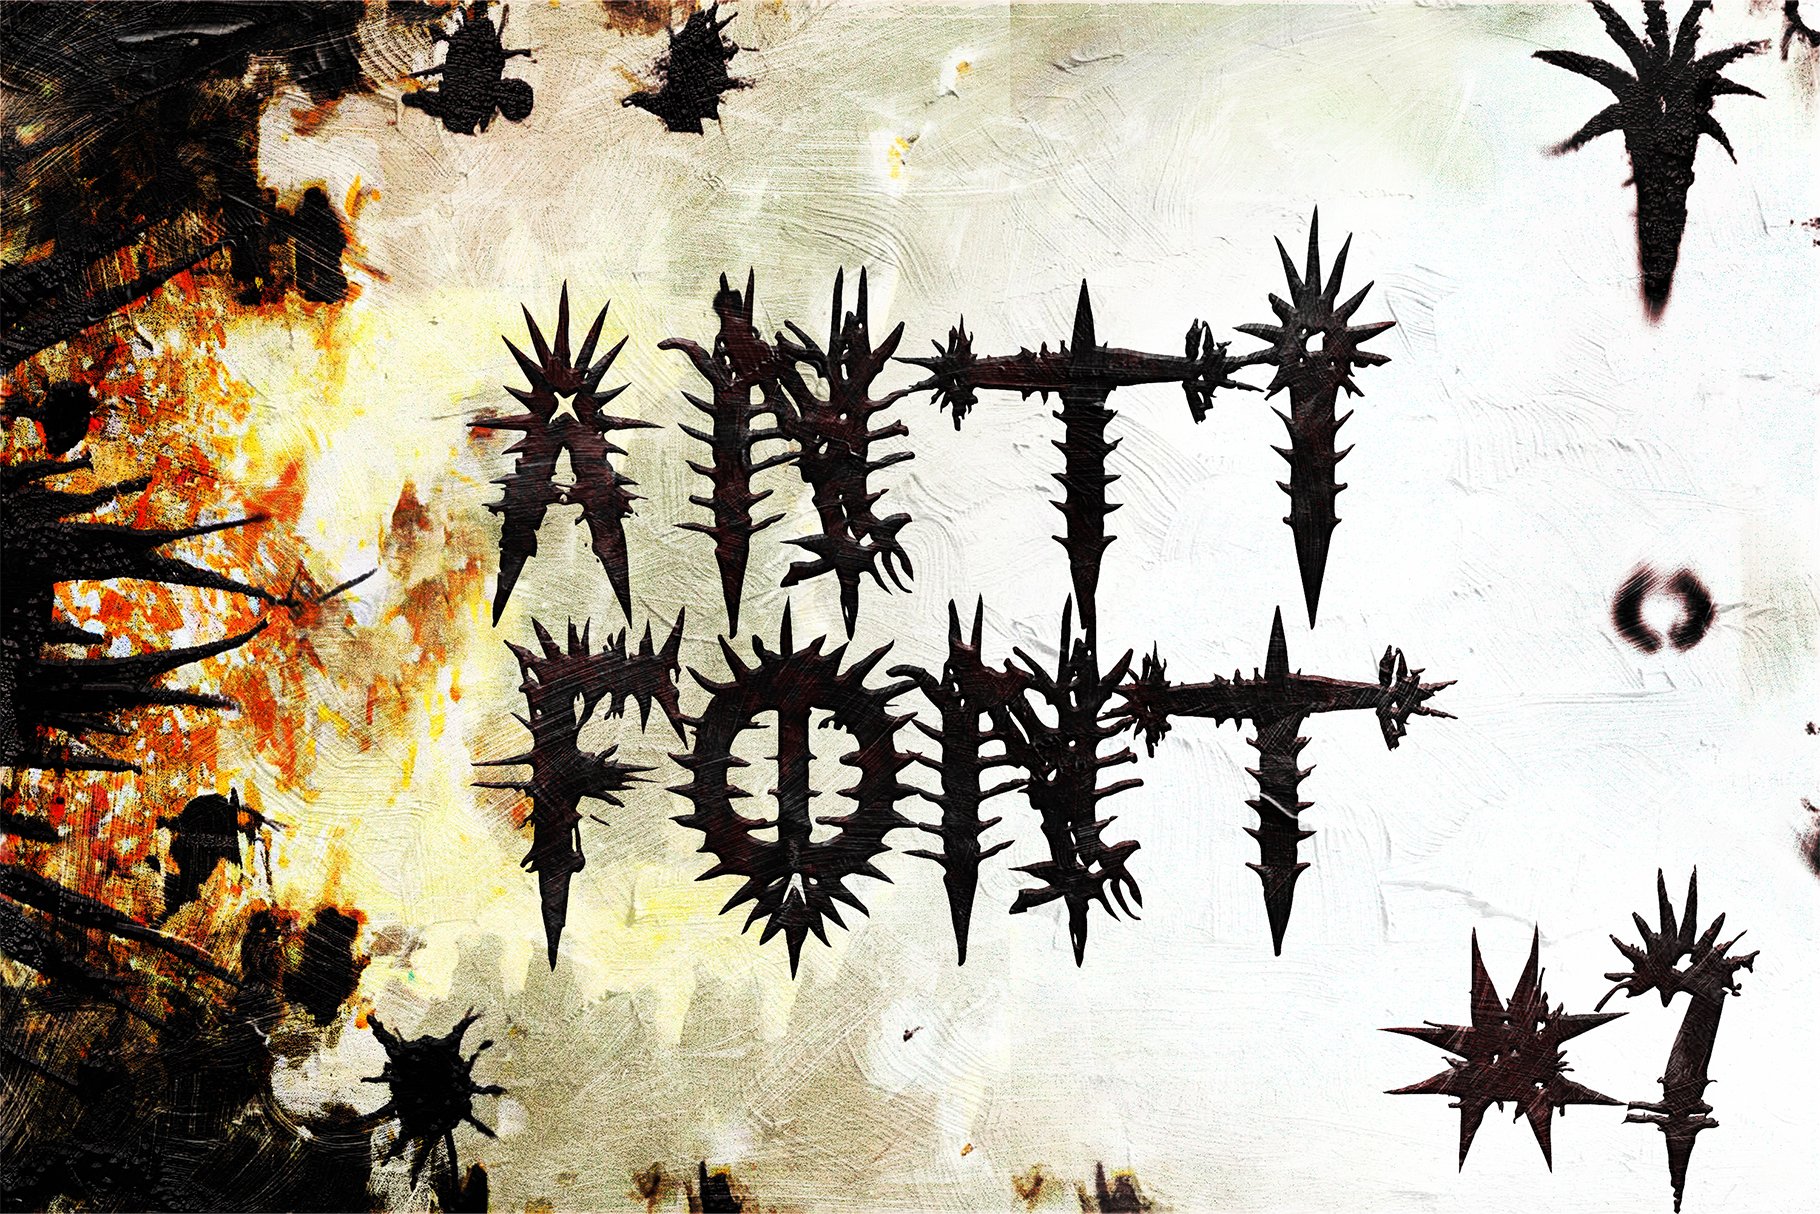 Anti-Font #7 cover image.